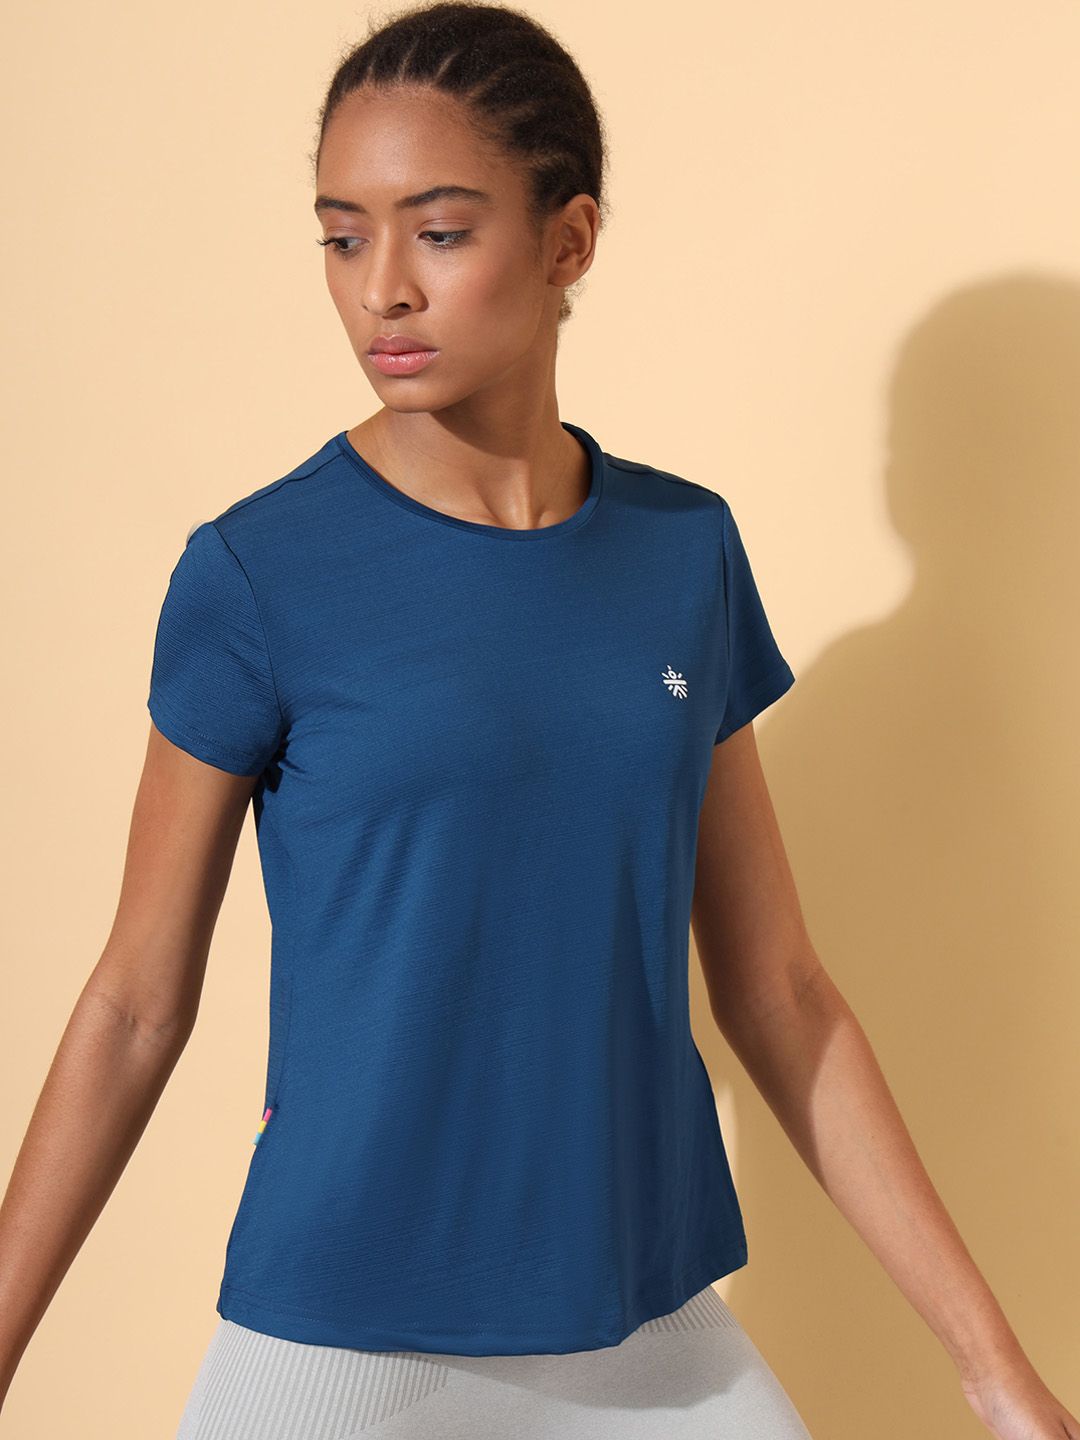 Cultsport Women Teal Blue Vitals Solid Running T-shirt Price in India